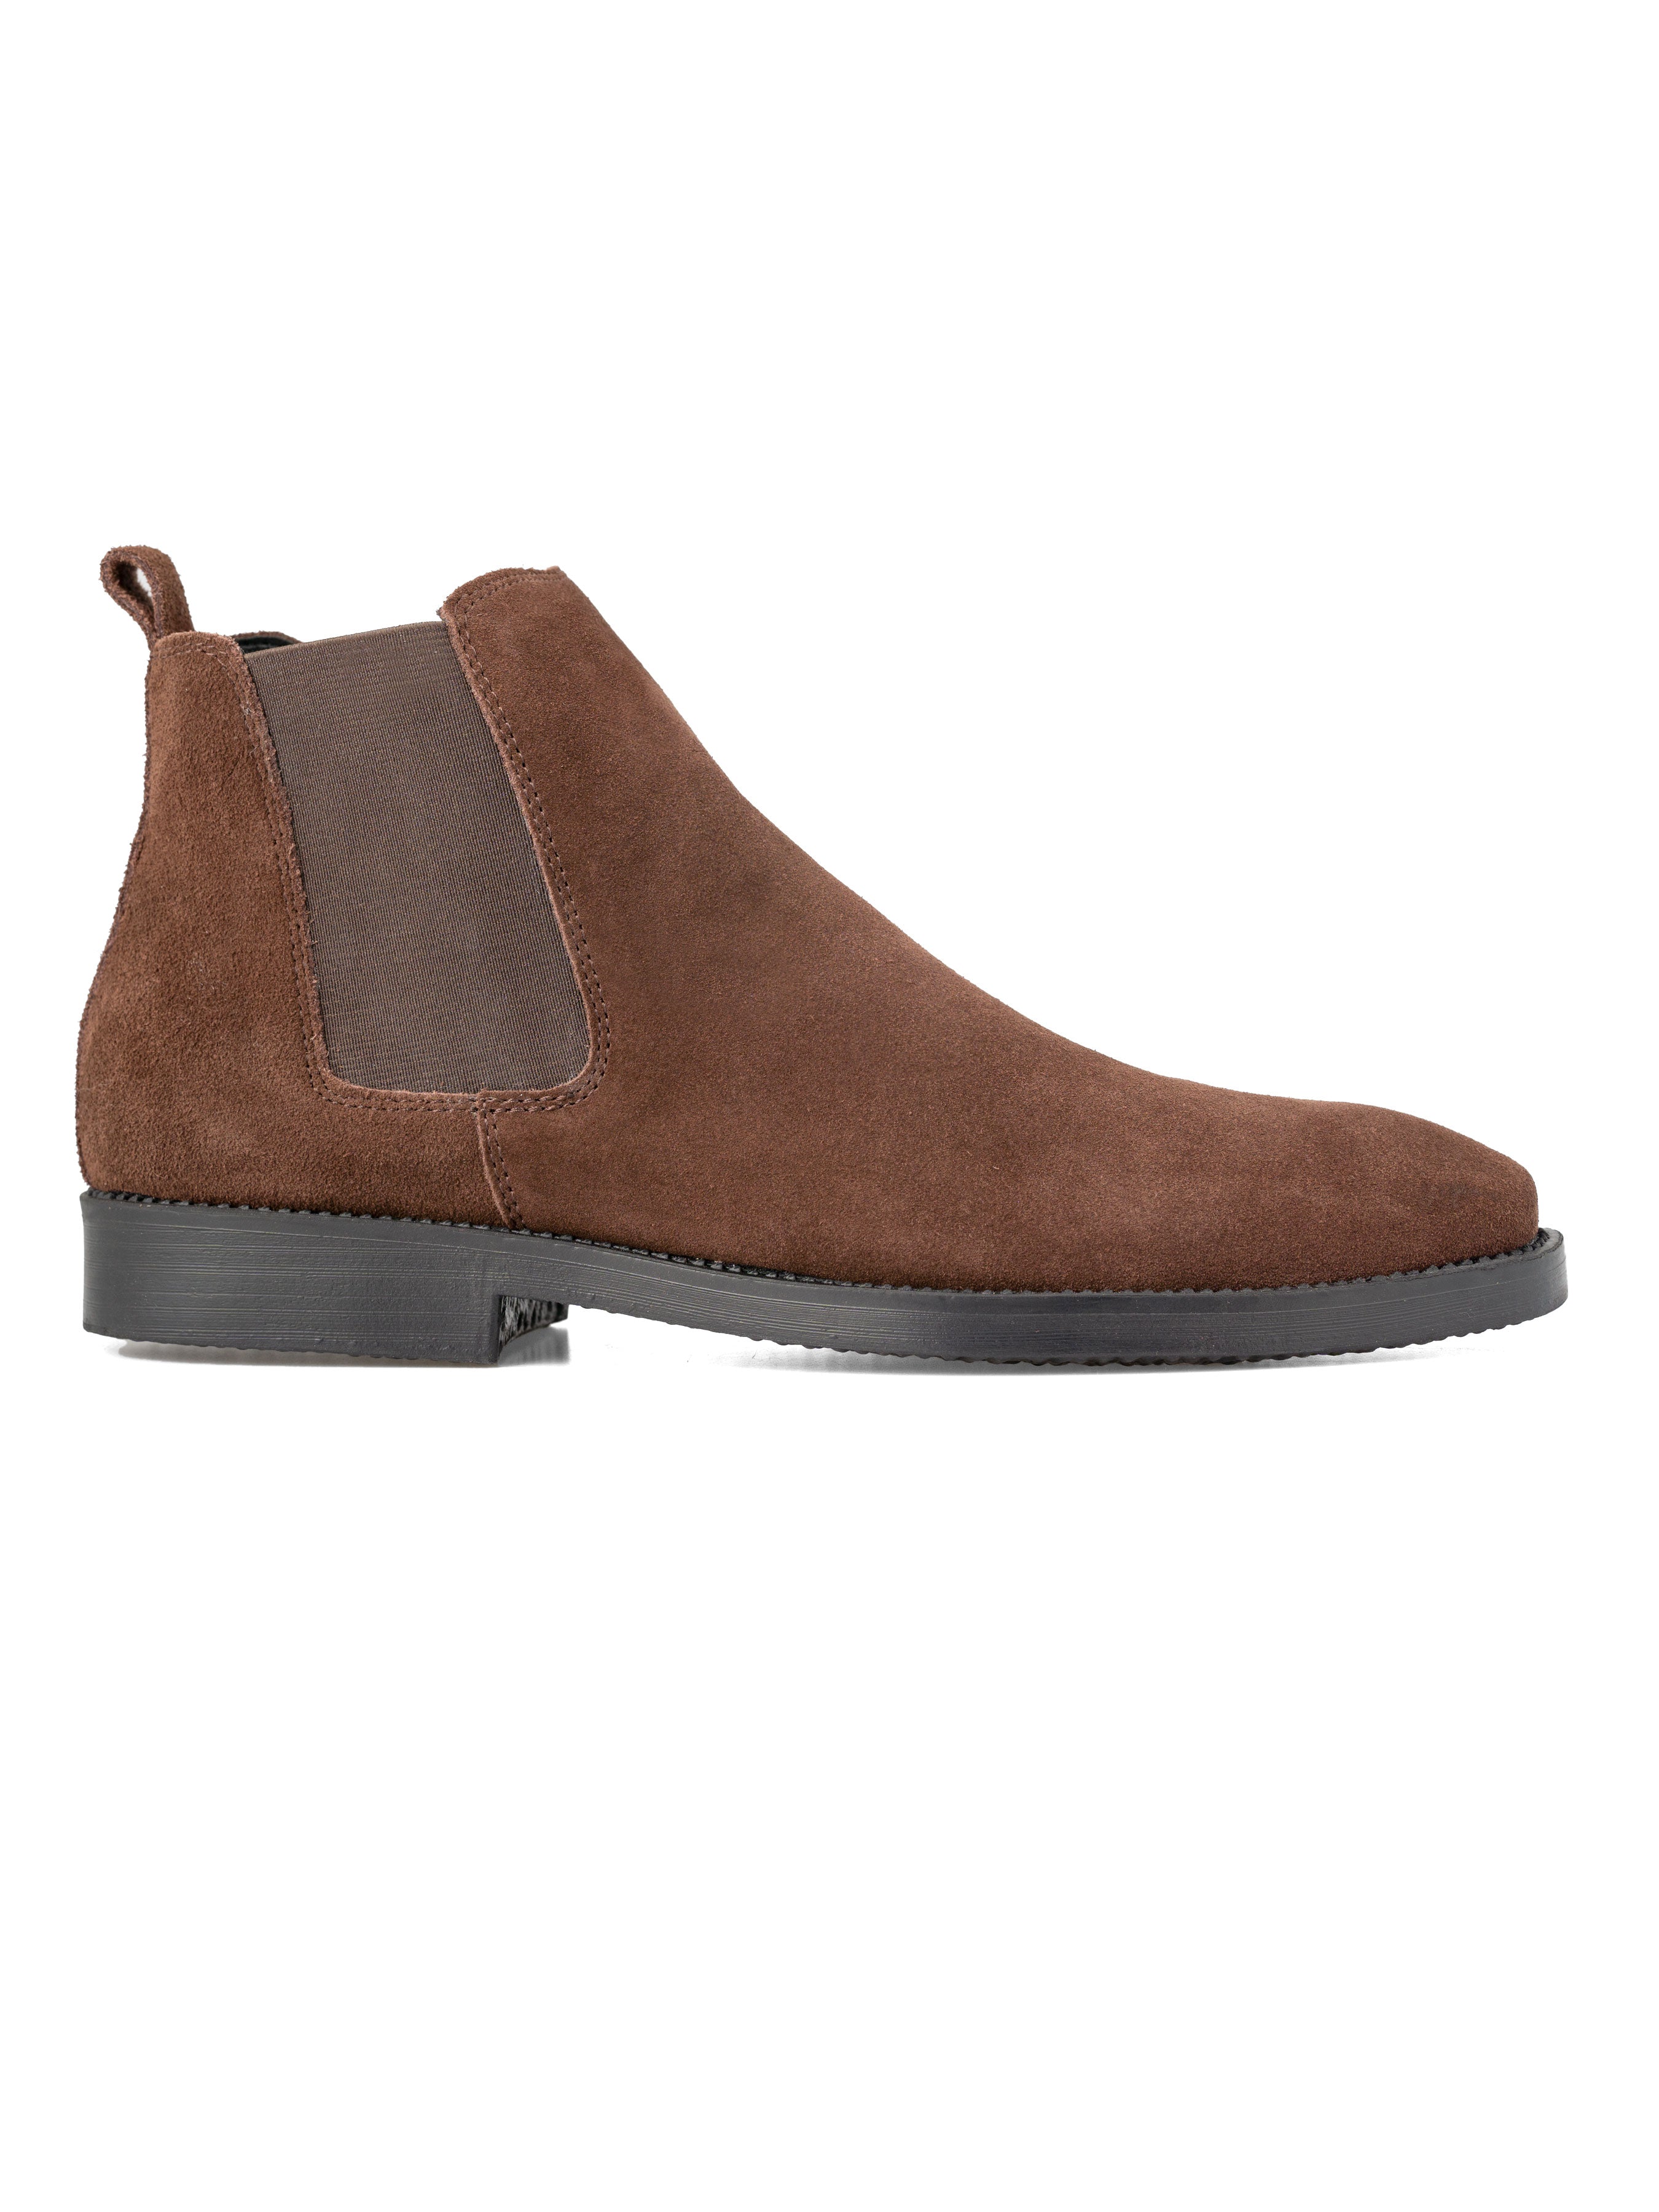 Chelsea Boots - Coffee Suede Leather (Crepe Sole) - Zeve Shoes